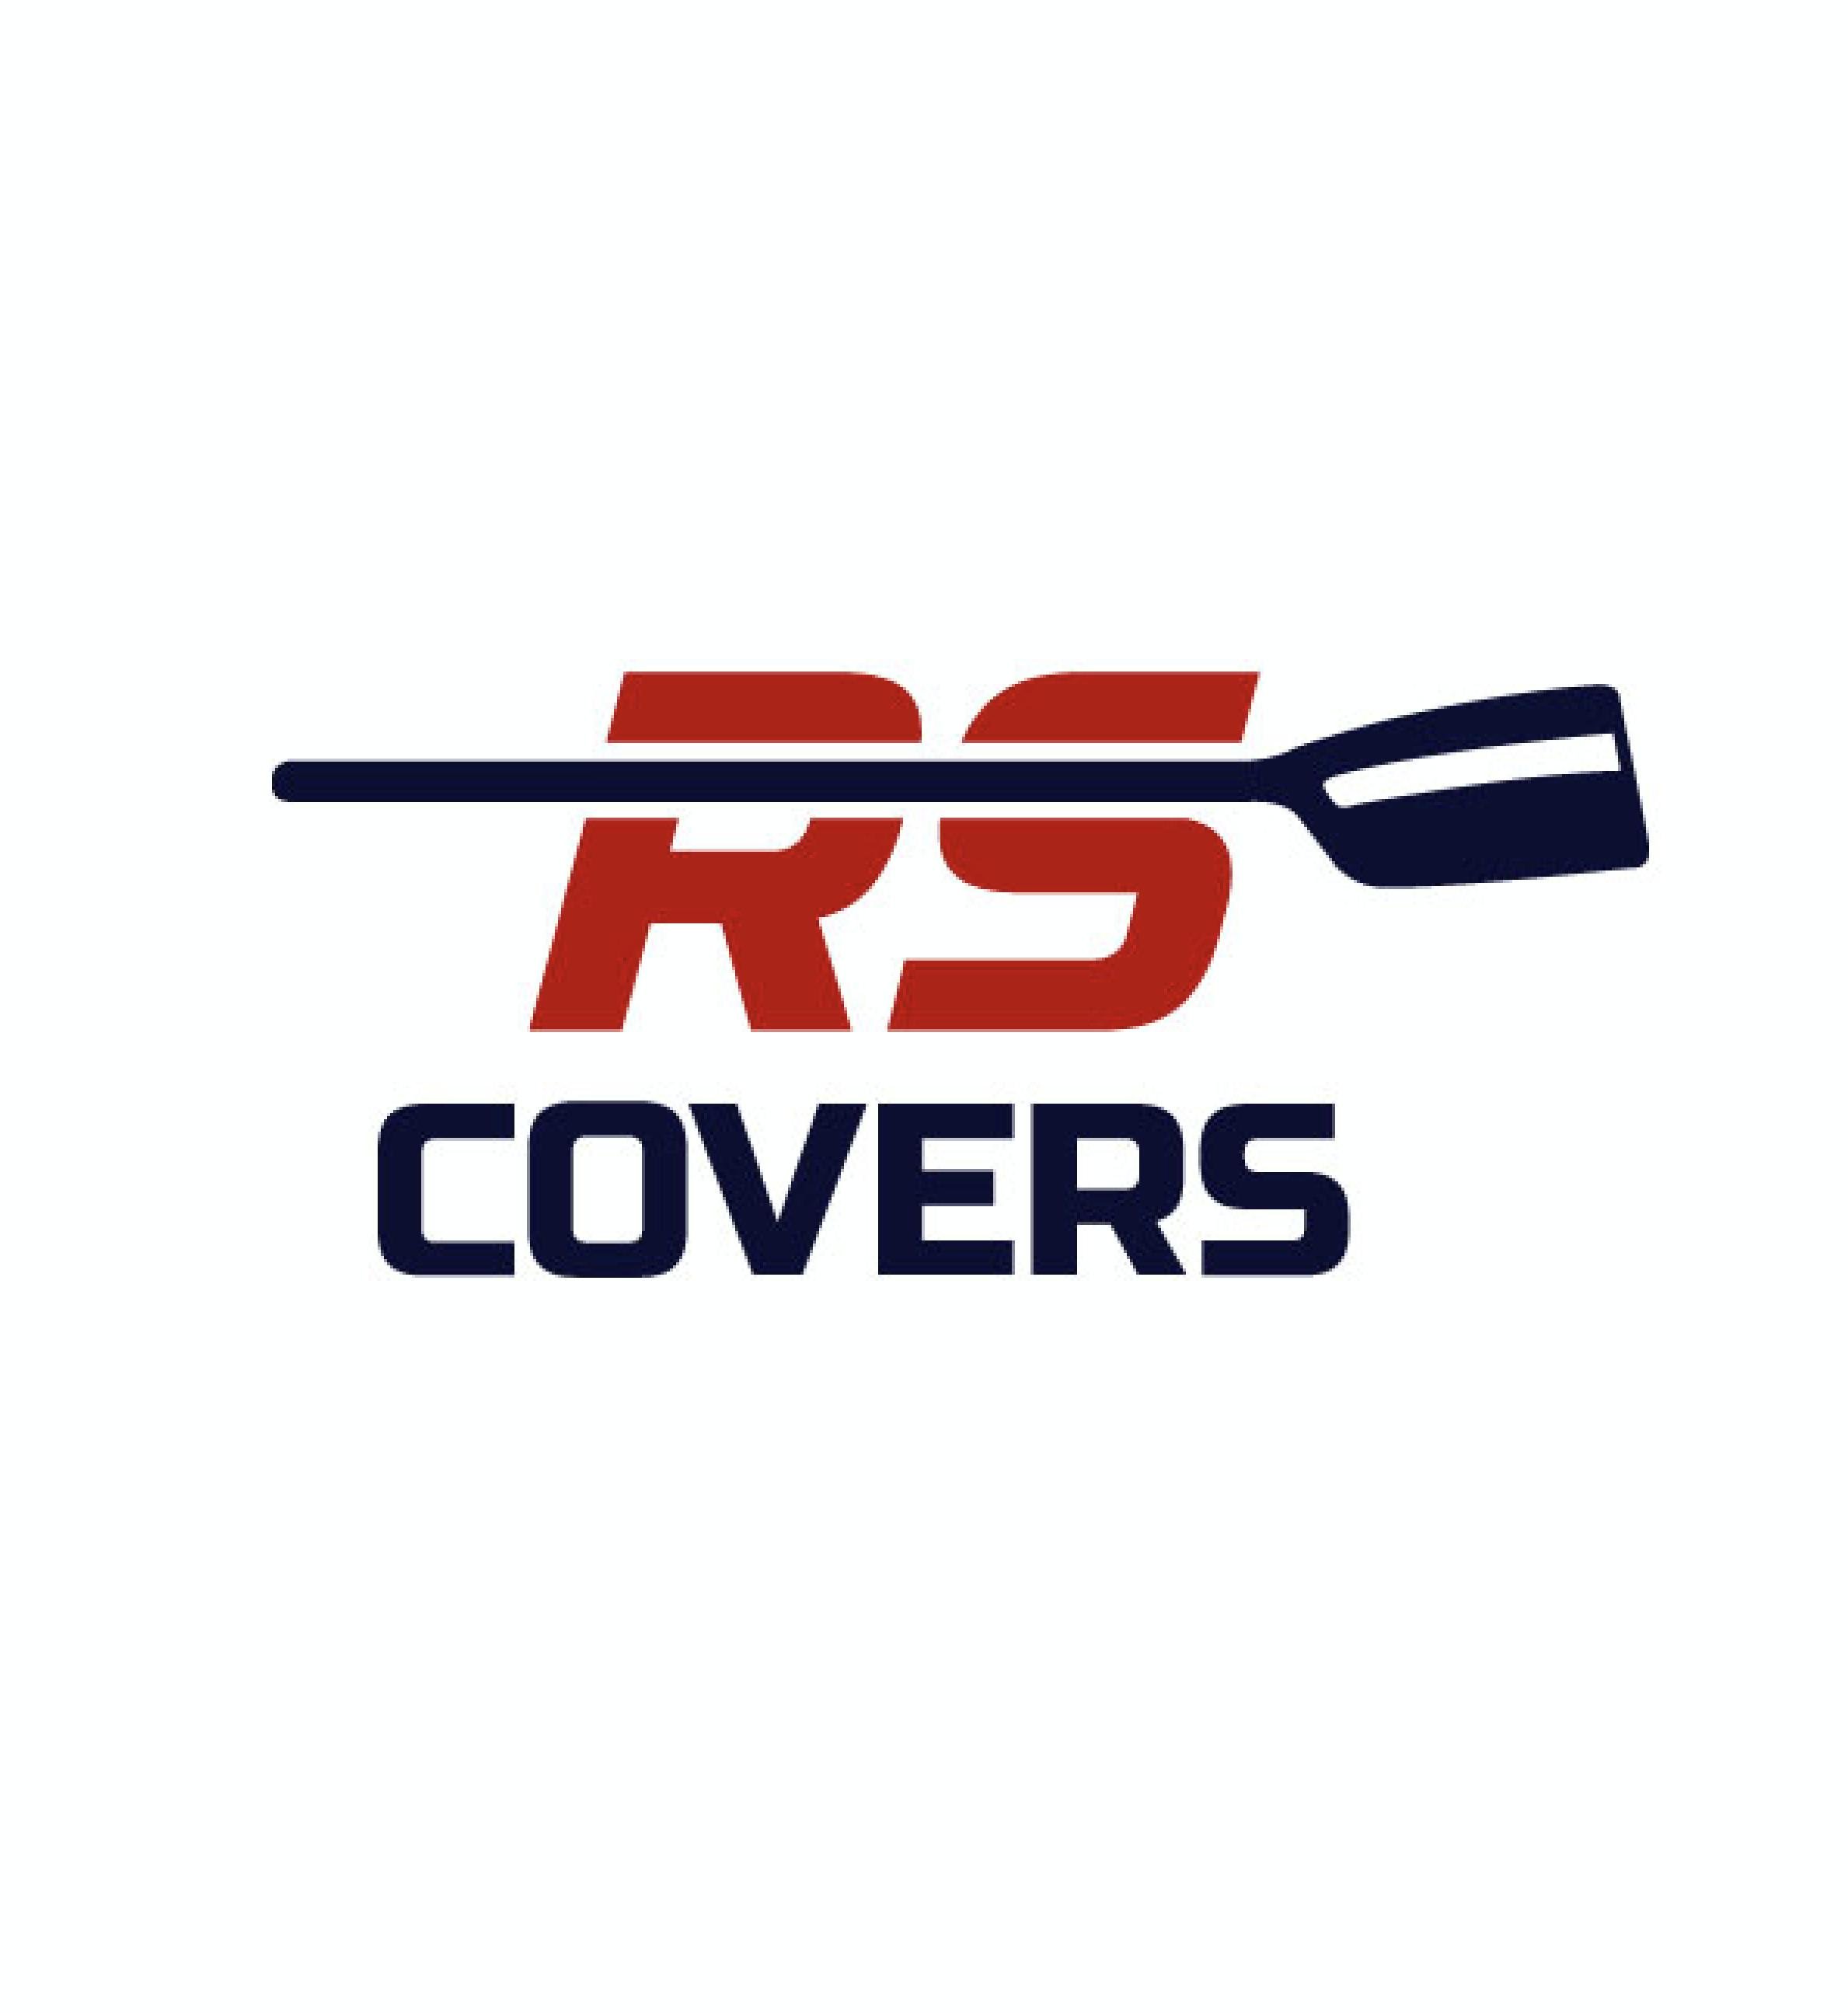 We specialize in custom-fit covers for racing shells,  made from durable marine-grade fabric. We sell boat covers, rigger bags, oar bags and other accessories.